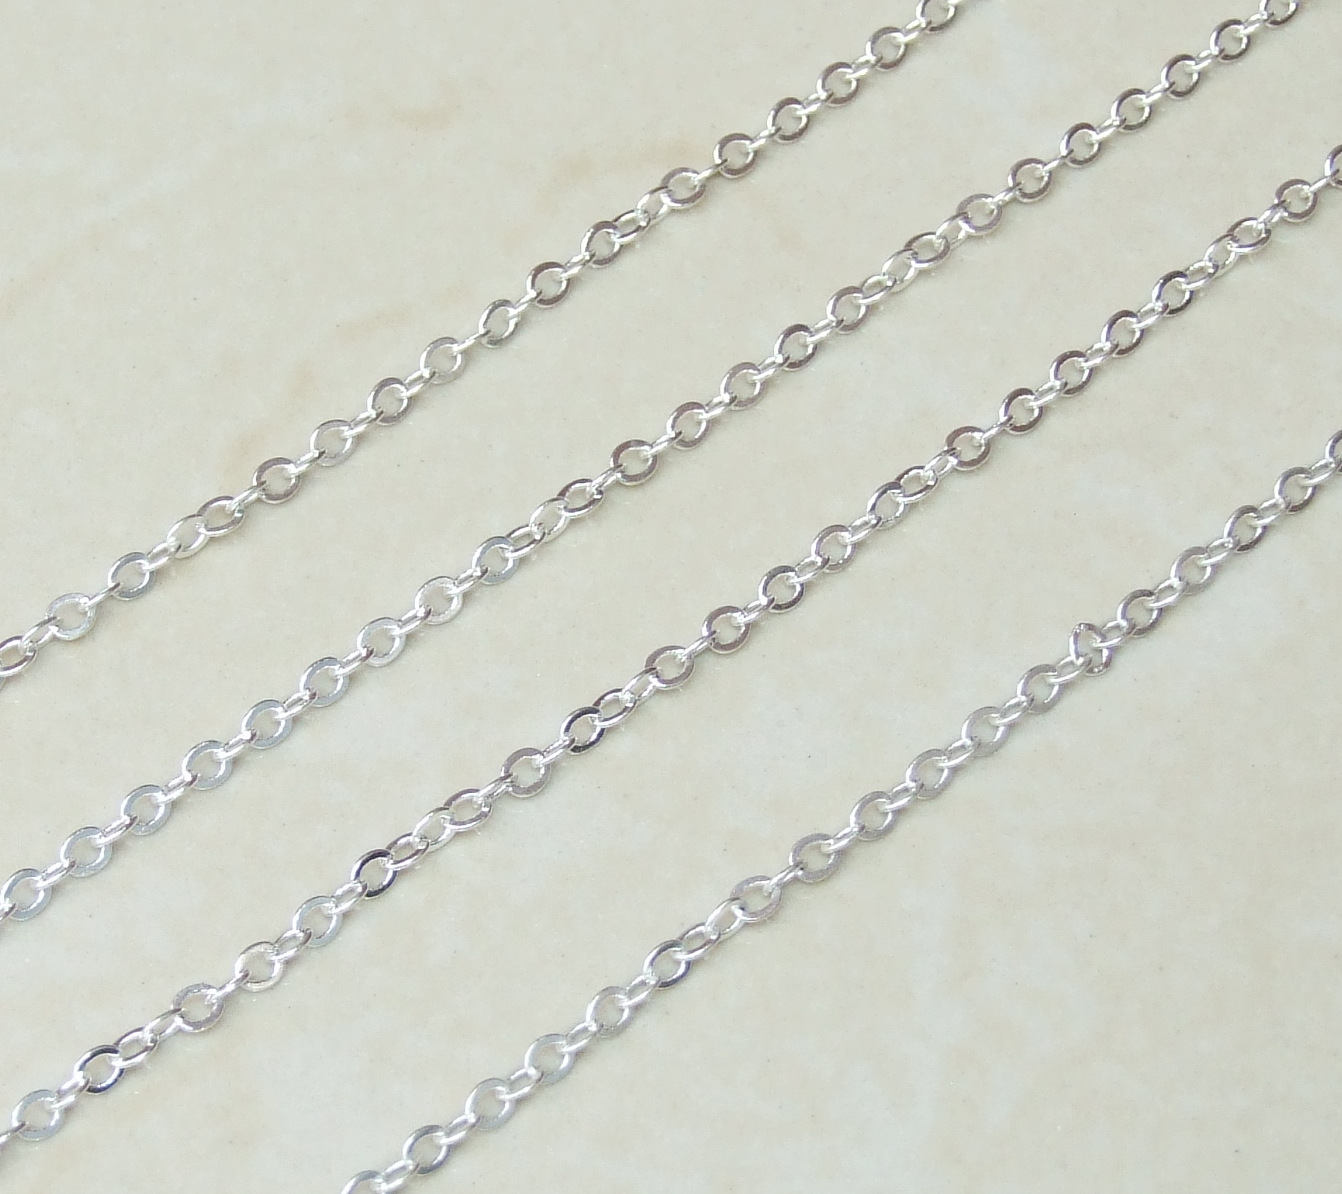 Cable Chain, Oval Flat Chain, Jewelry Chain, Necklace Chain, Silver Chain, Body Chain, Bulk Chain, Jewelry Supplies, 3.5mm x 3mm, 25Y-S